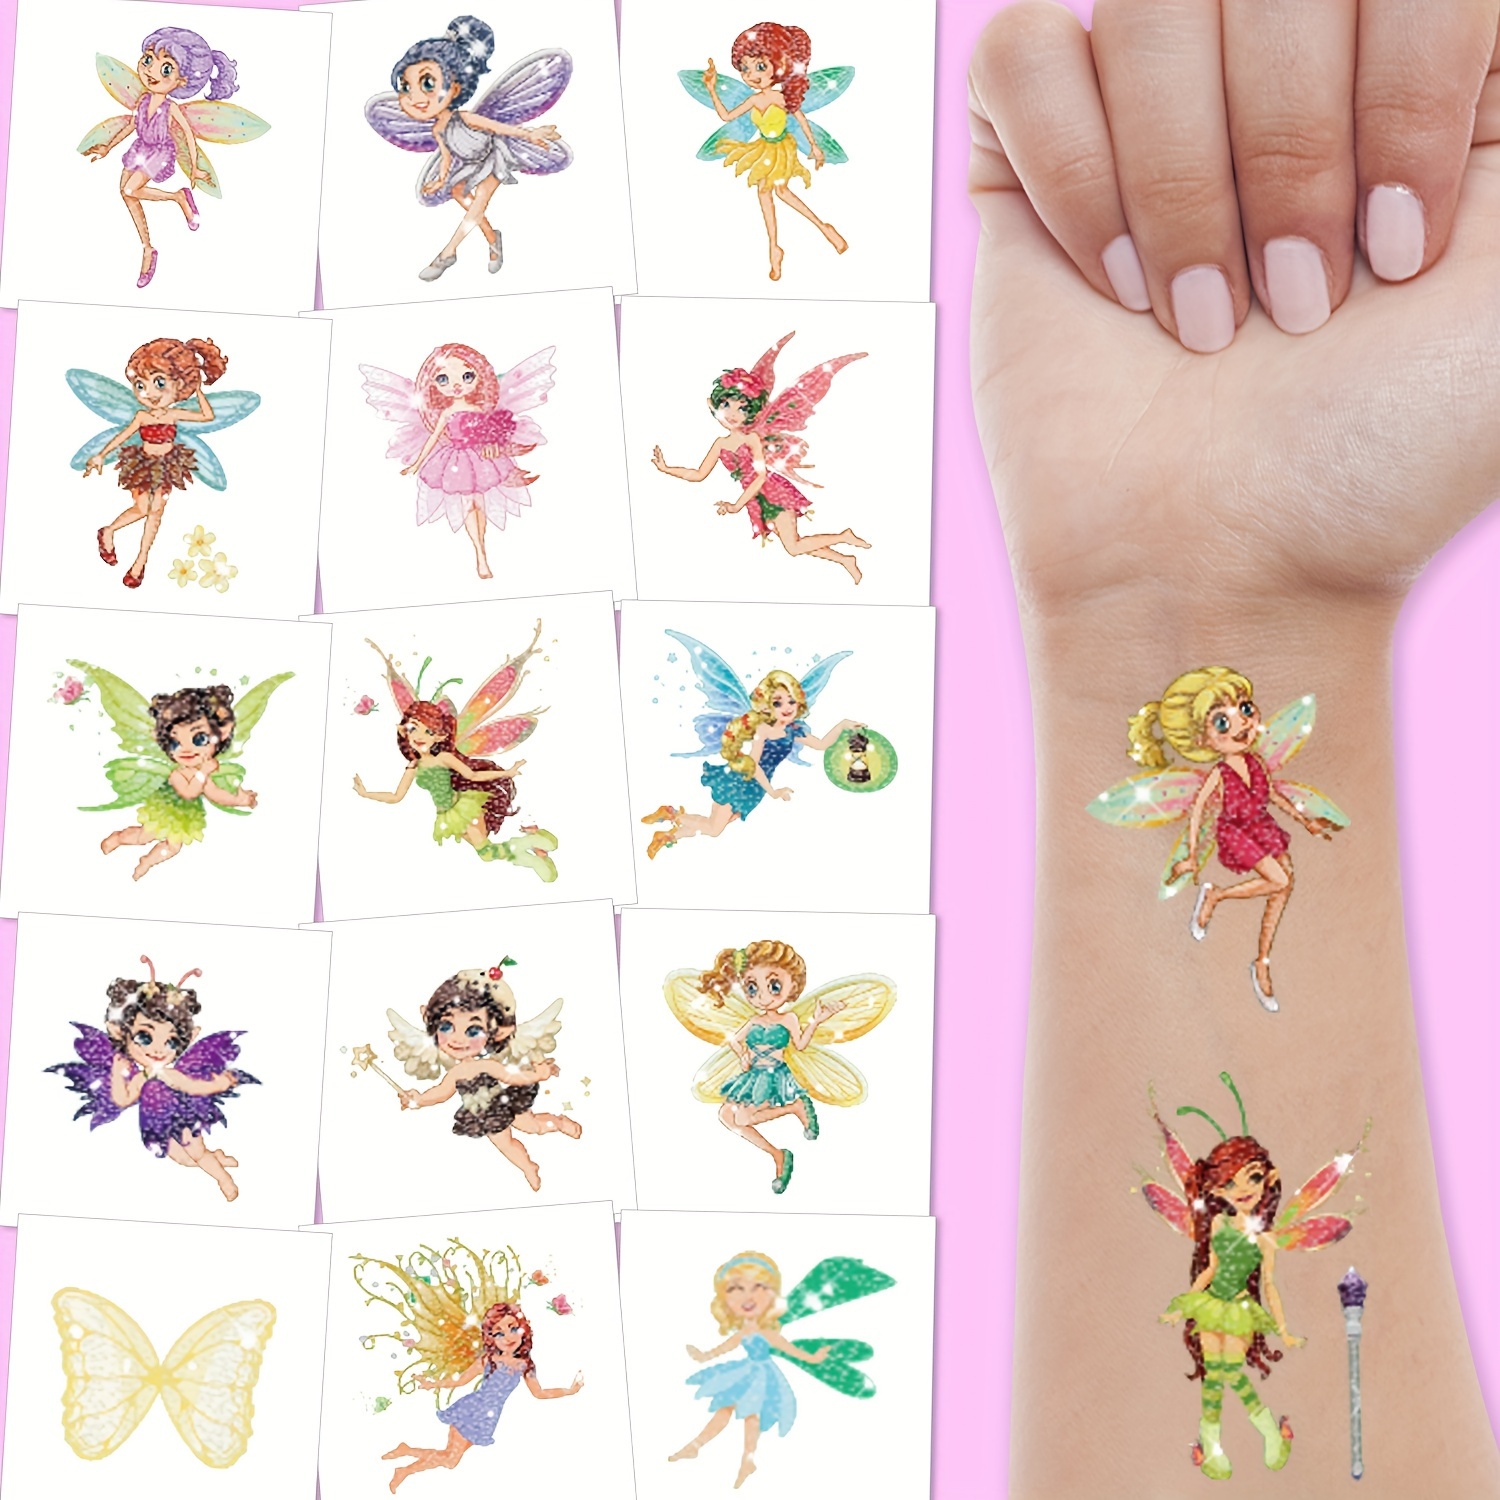 

10 Sheets Sparkling Fairy Temporary Tattoos With Glitter, Butterfly & Floral Designs, Perfect For Girls Birthday Gifts And Party Favors For Music Festival